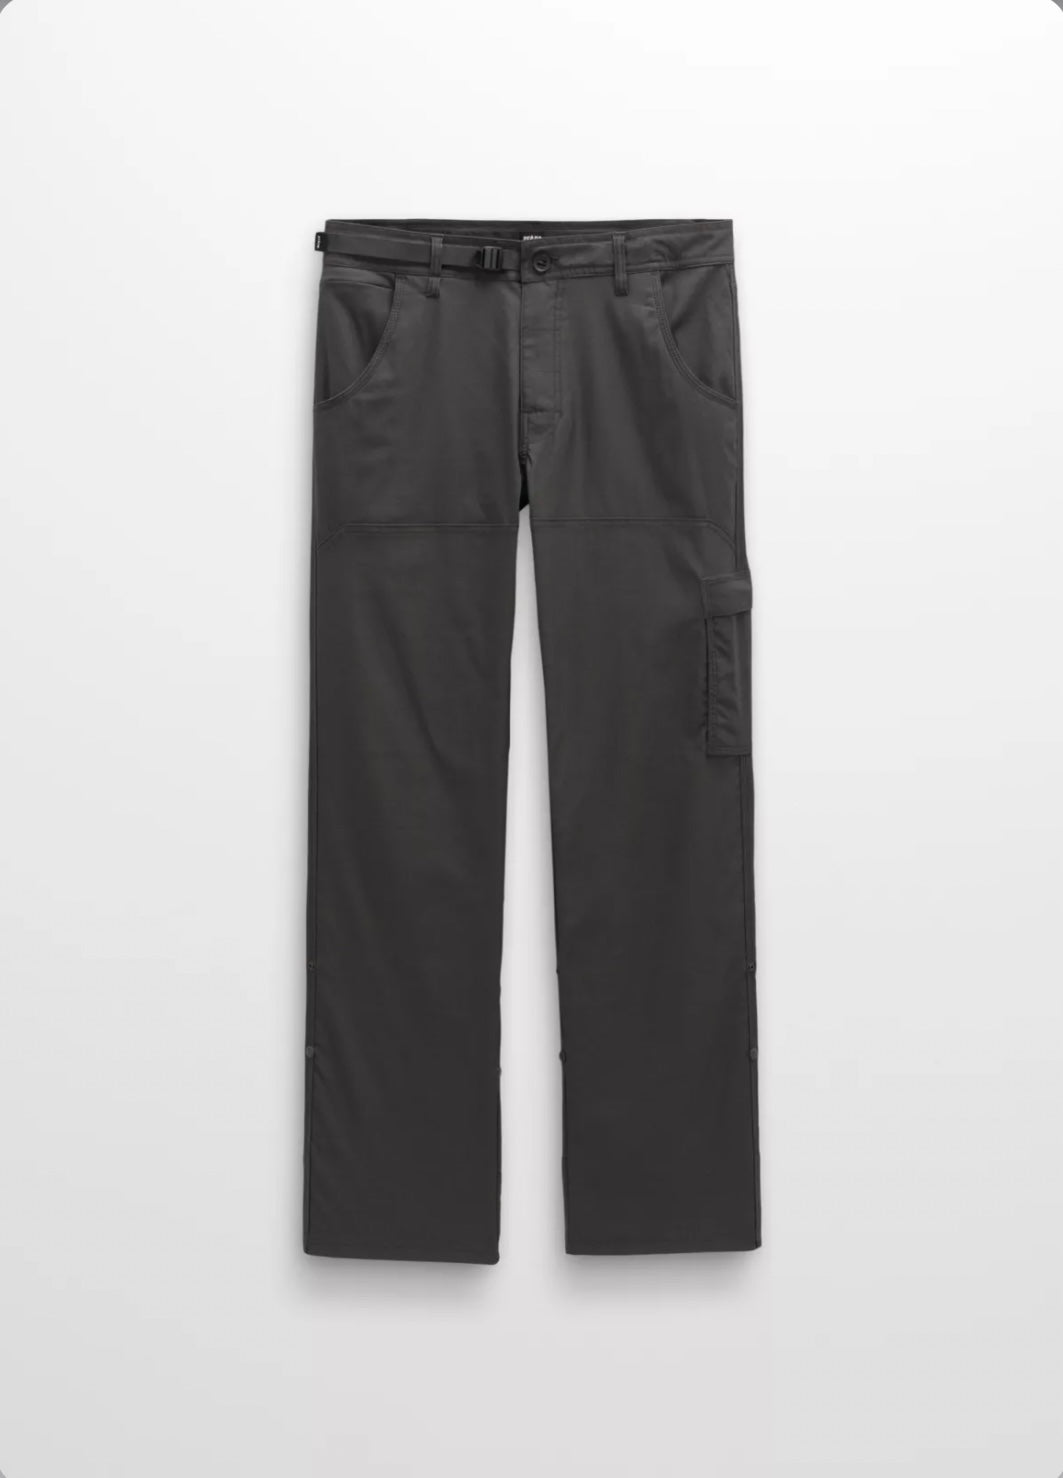 Prana Stretch Zion Pant Ii 32 2022  Outdoor Clothing & Gear For Skiing,  Camping And Climbing